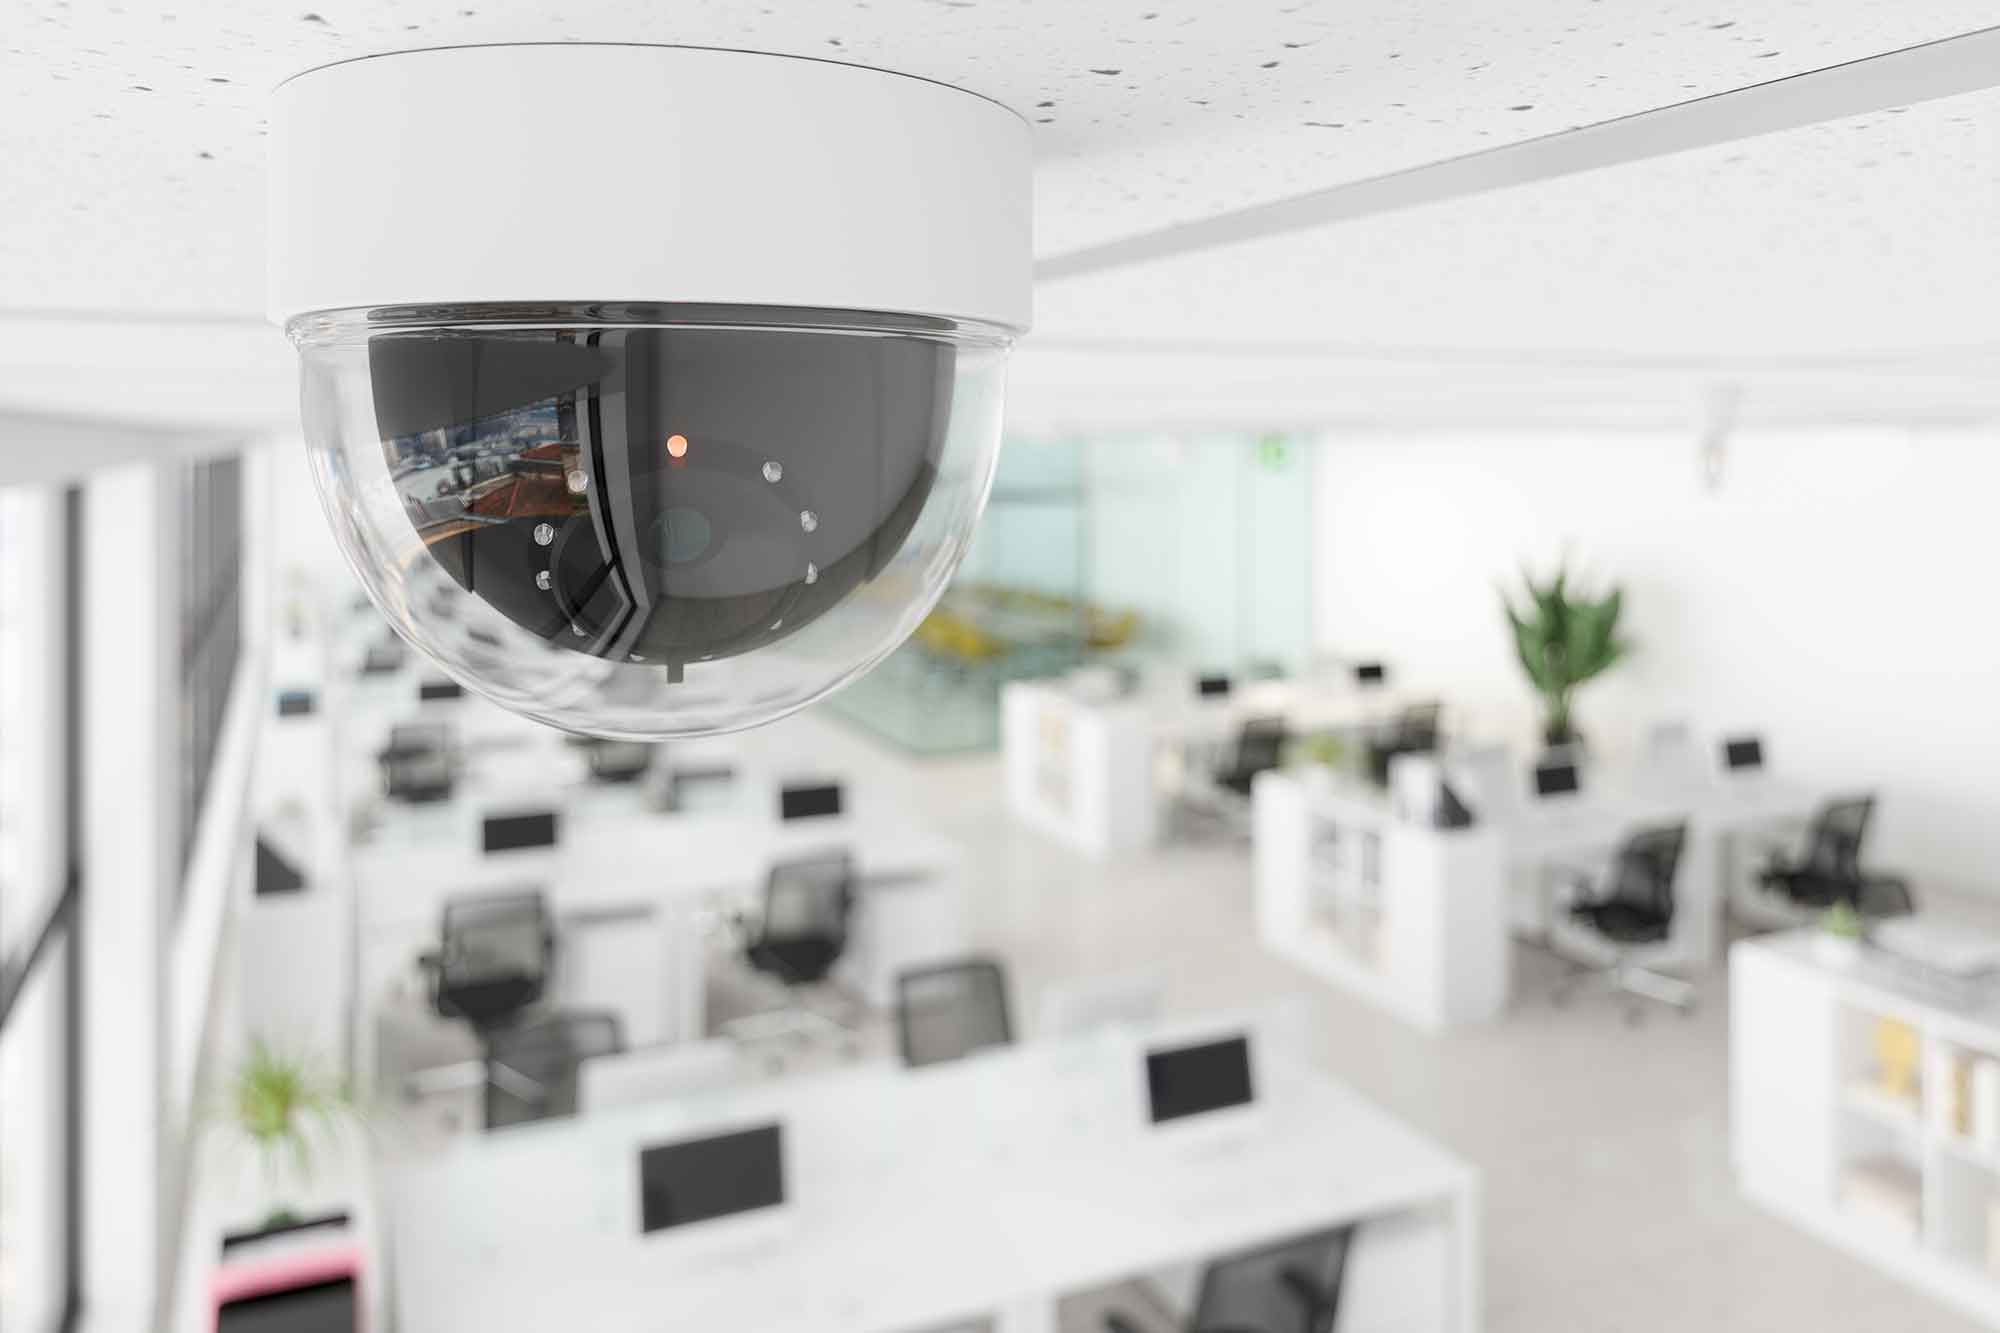 Common mistakes to avoid during CCTV security camera installation